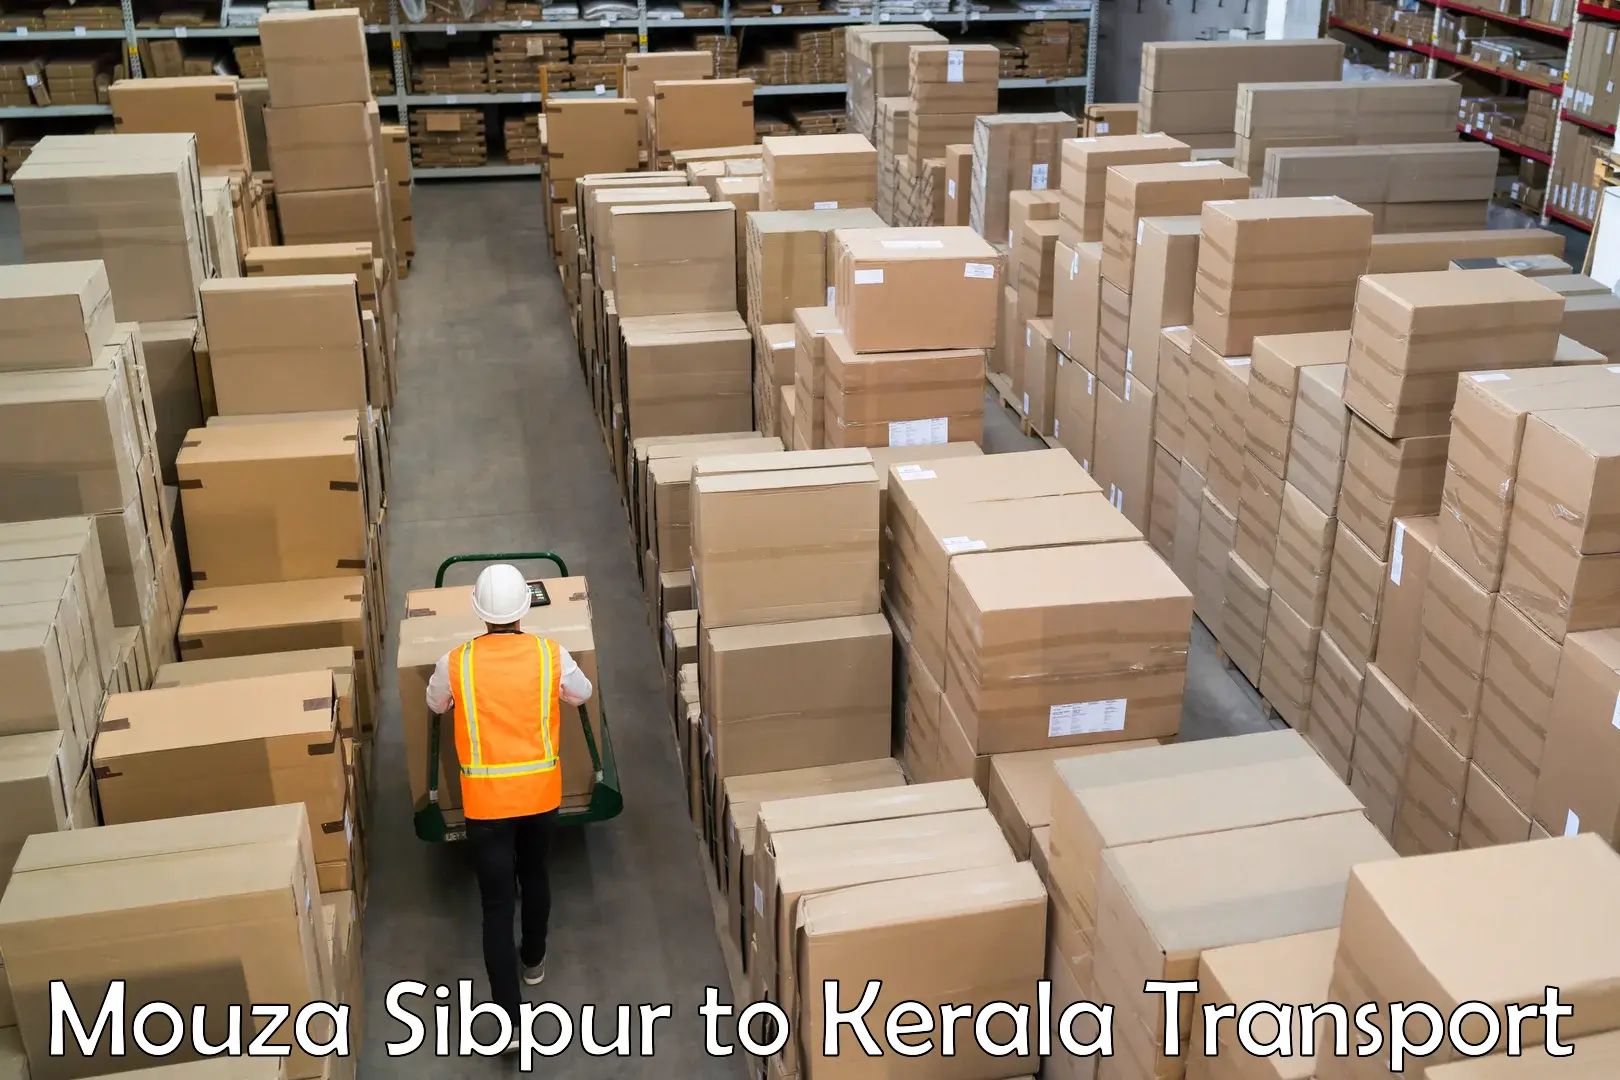 Road transport online services in Mouza Sibpur to Thamarassery